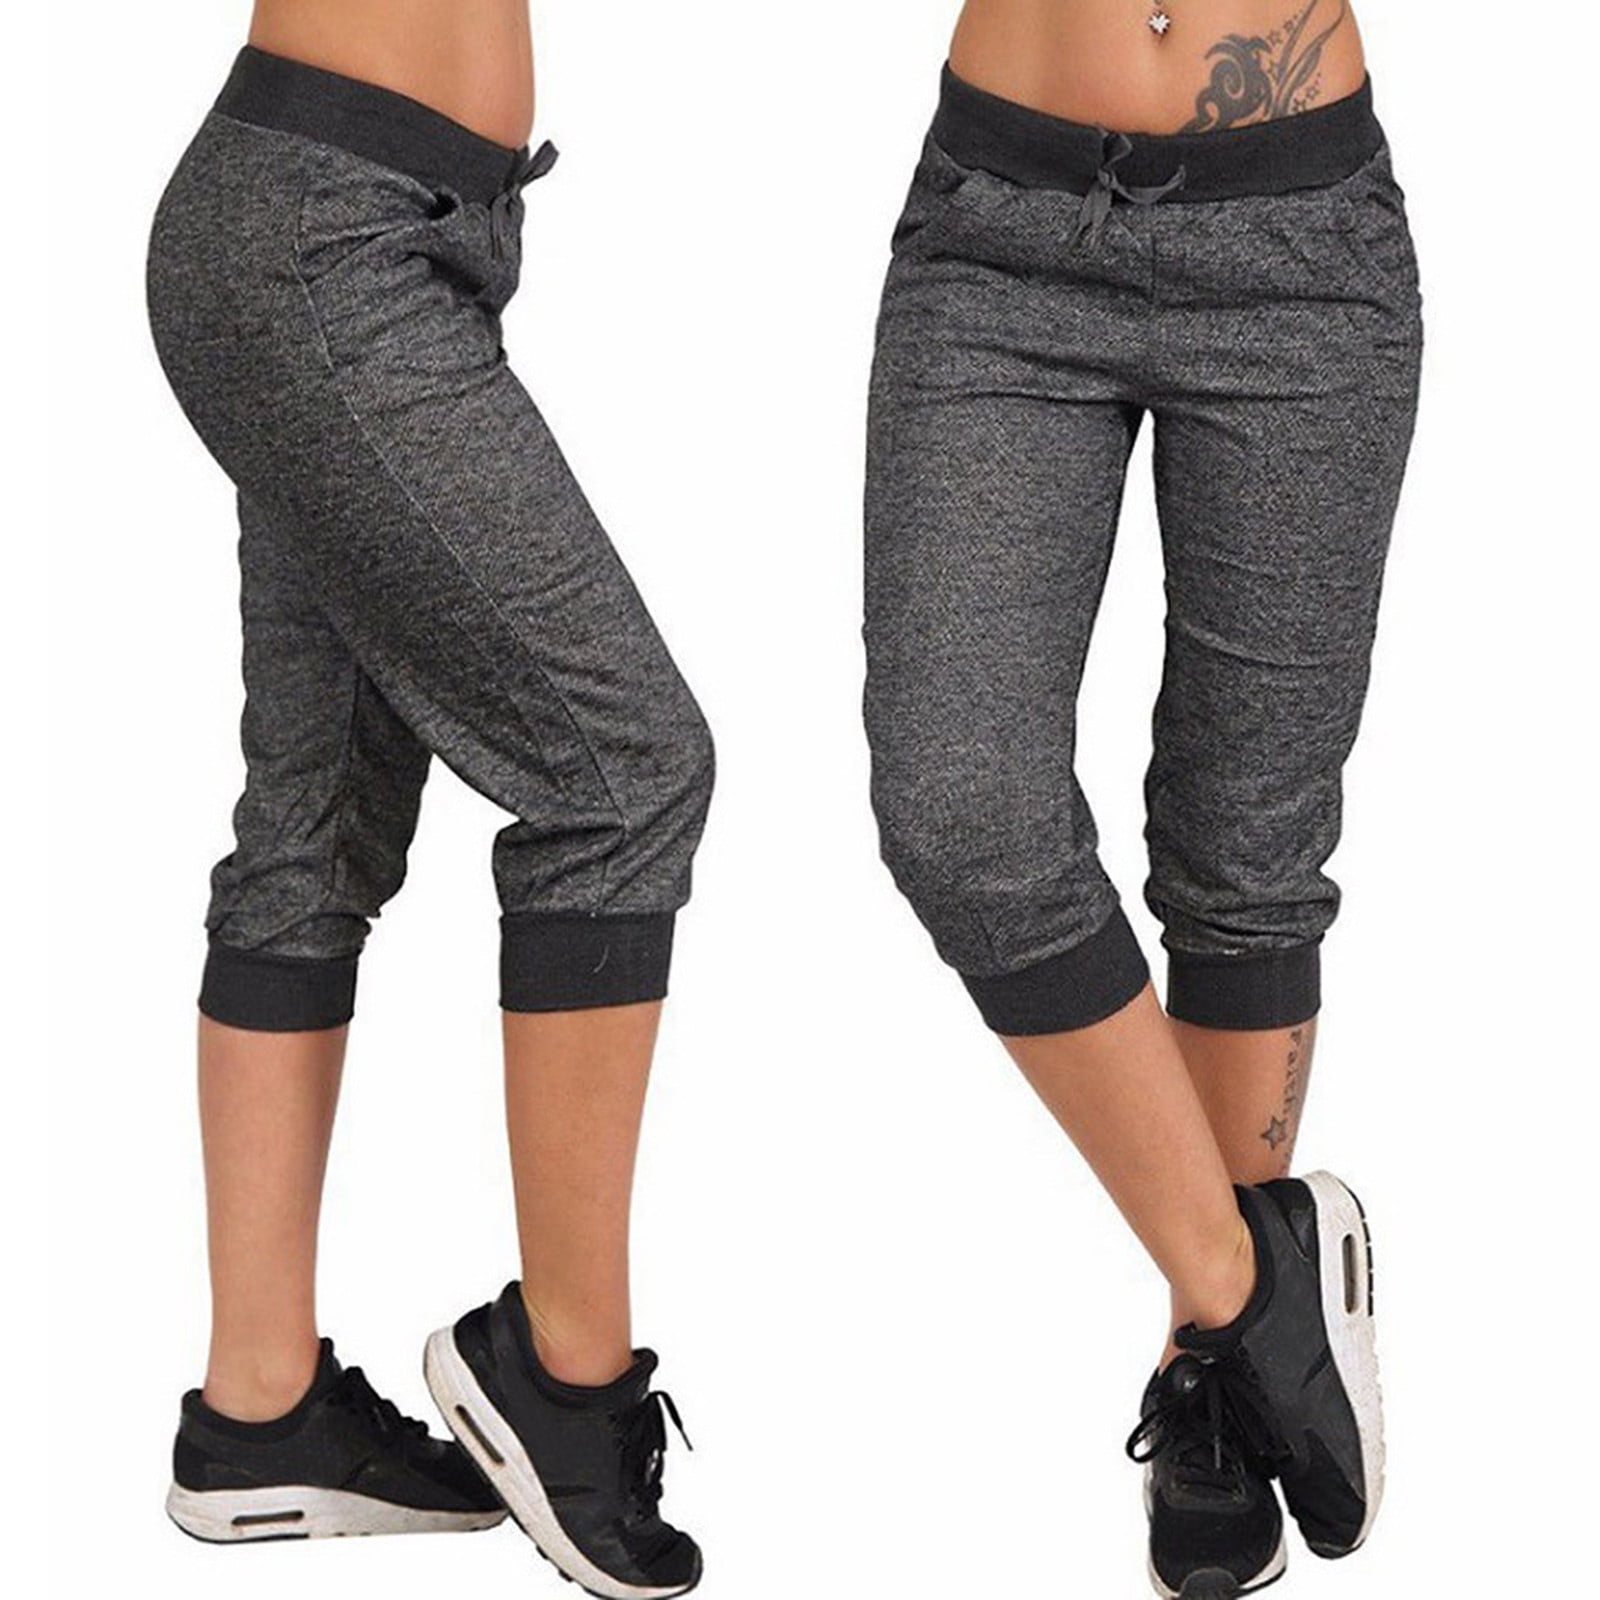 YYDGH Women's Sweatpants Capri Pants Cropped Jogger Running Pants Lounge  Loose Fit Drawstring Elastic Waist with Side Pockets Gray S 